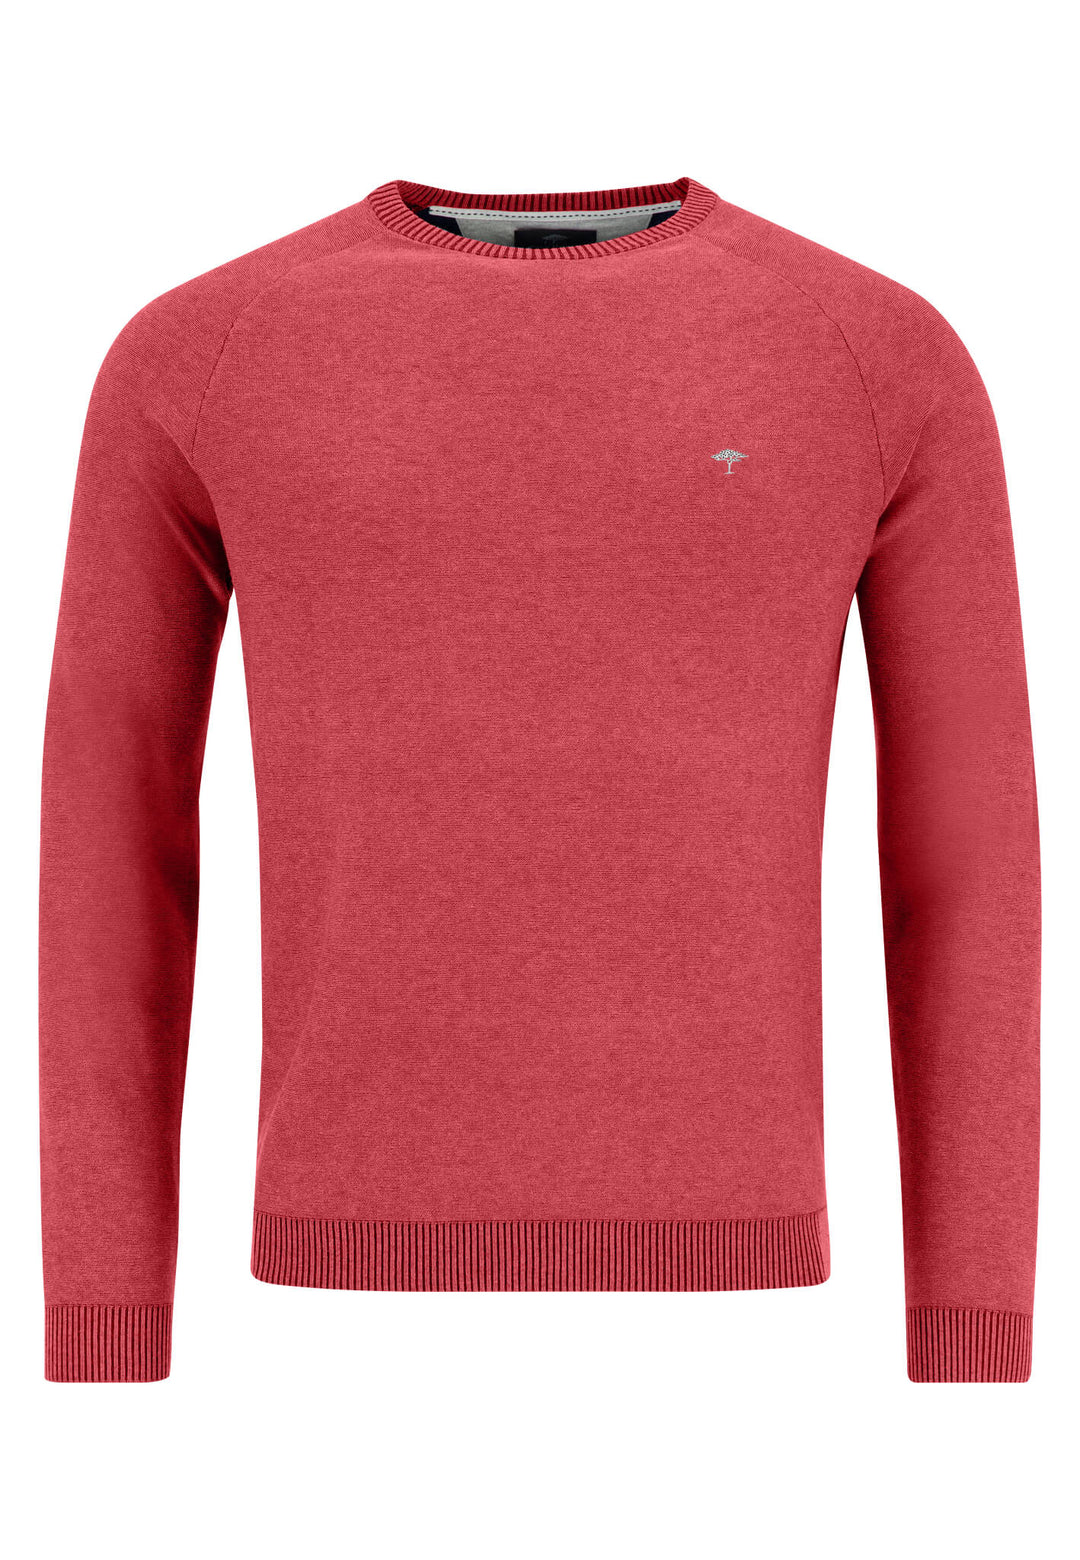 FYNCH-HATTON sweater made of fine Outlet – FYNCH-HATTON | cotton